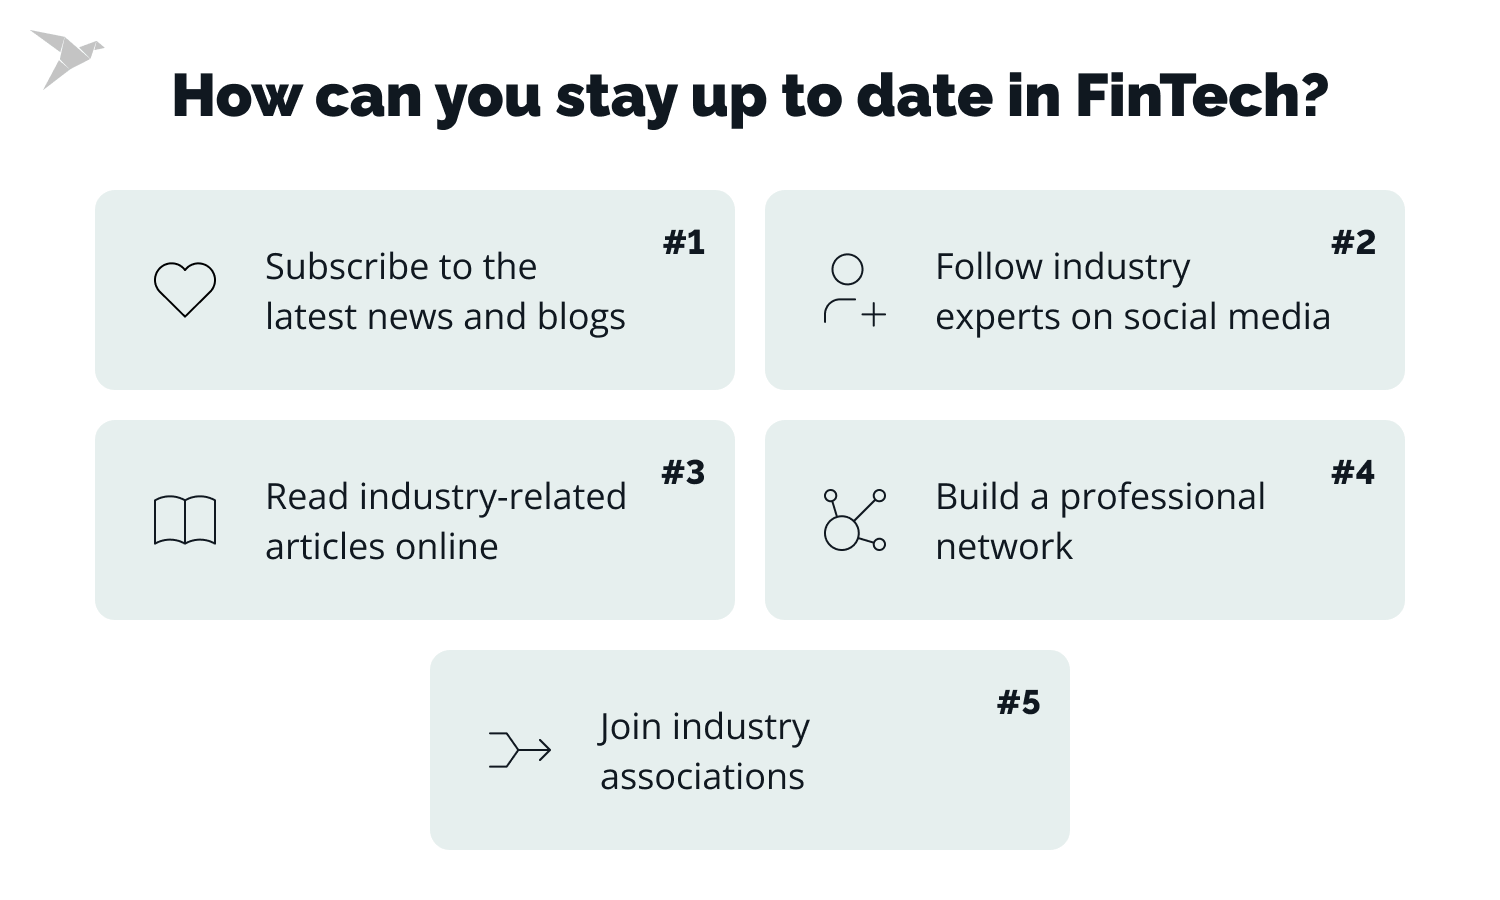 how you can stay up to date in fintech